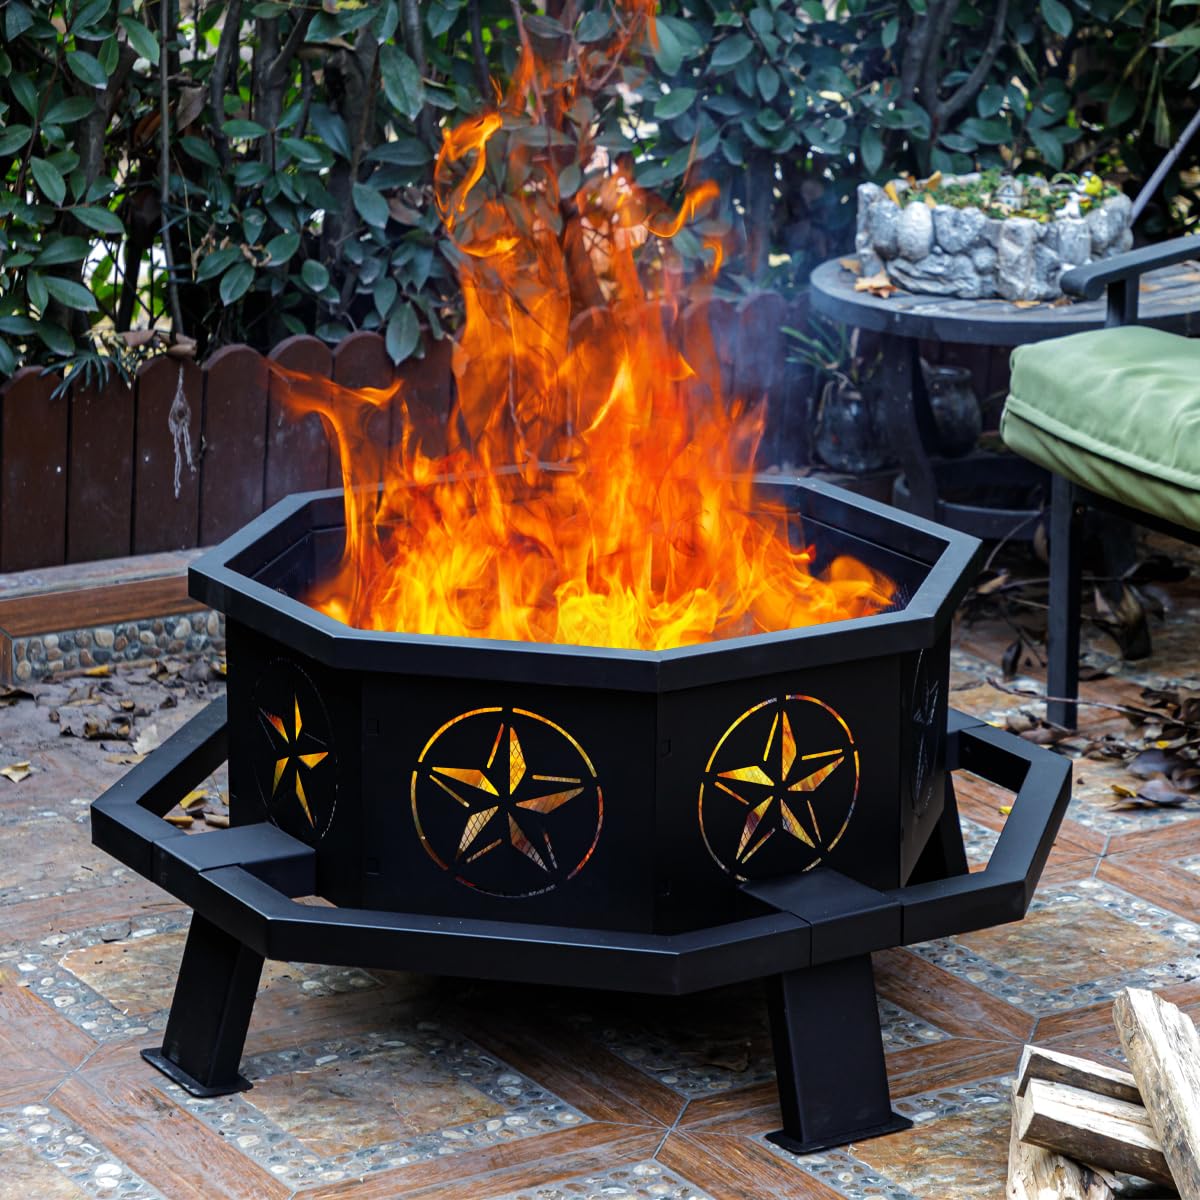 Verdeluxe 35 Inch Octagonal Fire Pit,Outdoor Fire Pit,Wood Burning Firepit,Bonfire Fire Pit,Firepits for Outside,Camping, Backyard, Patio,Bonfire